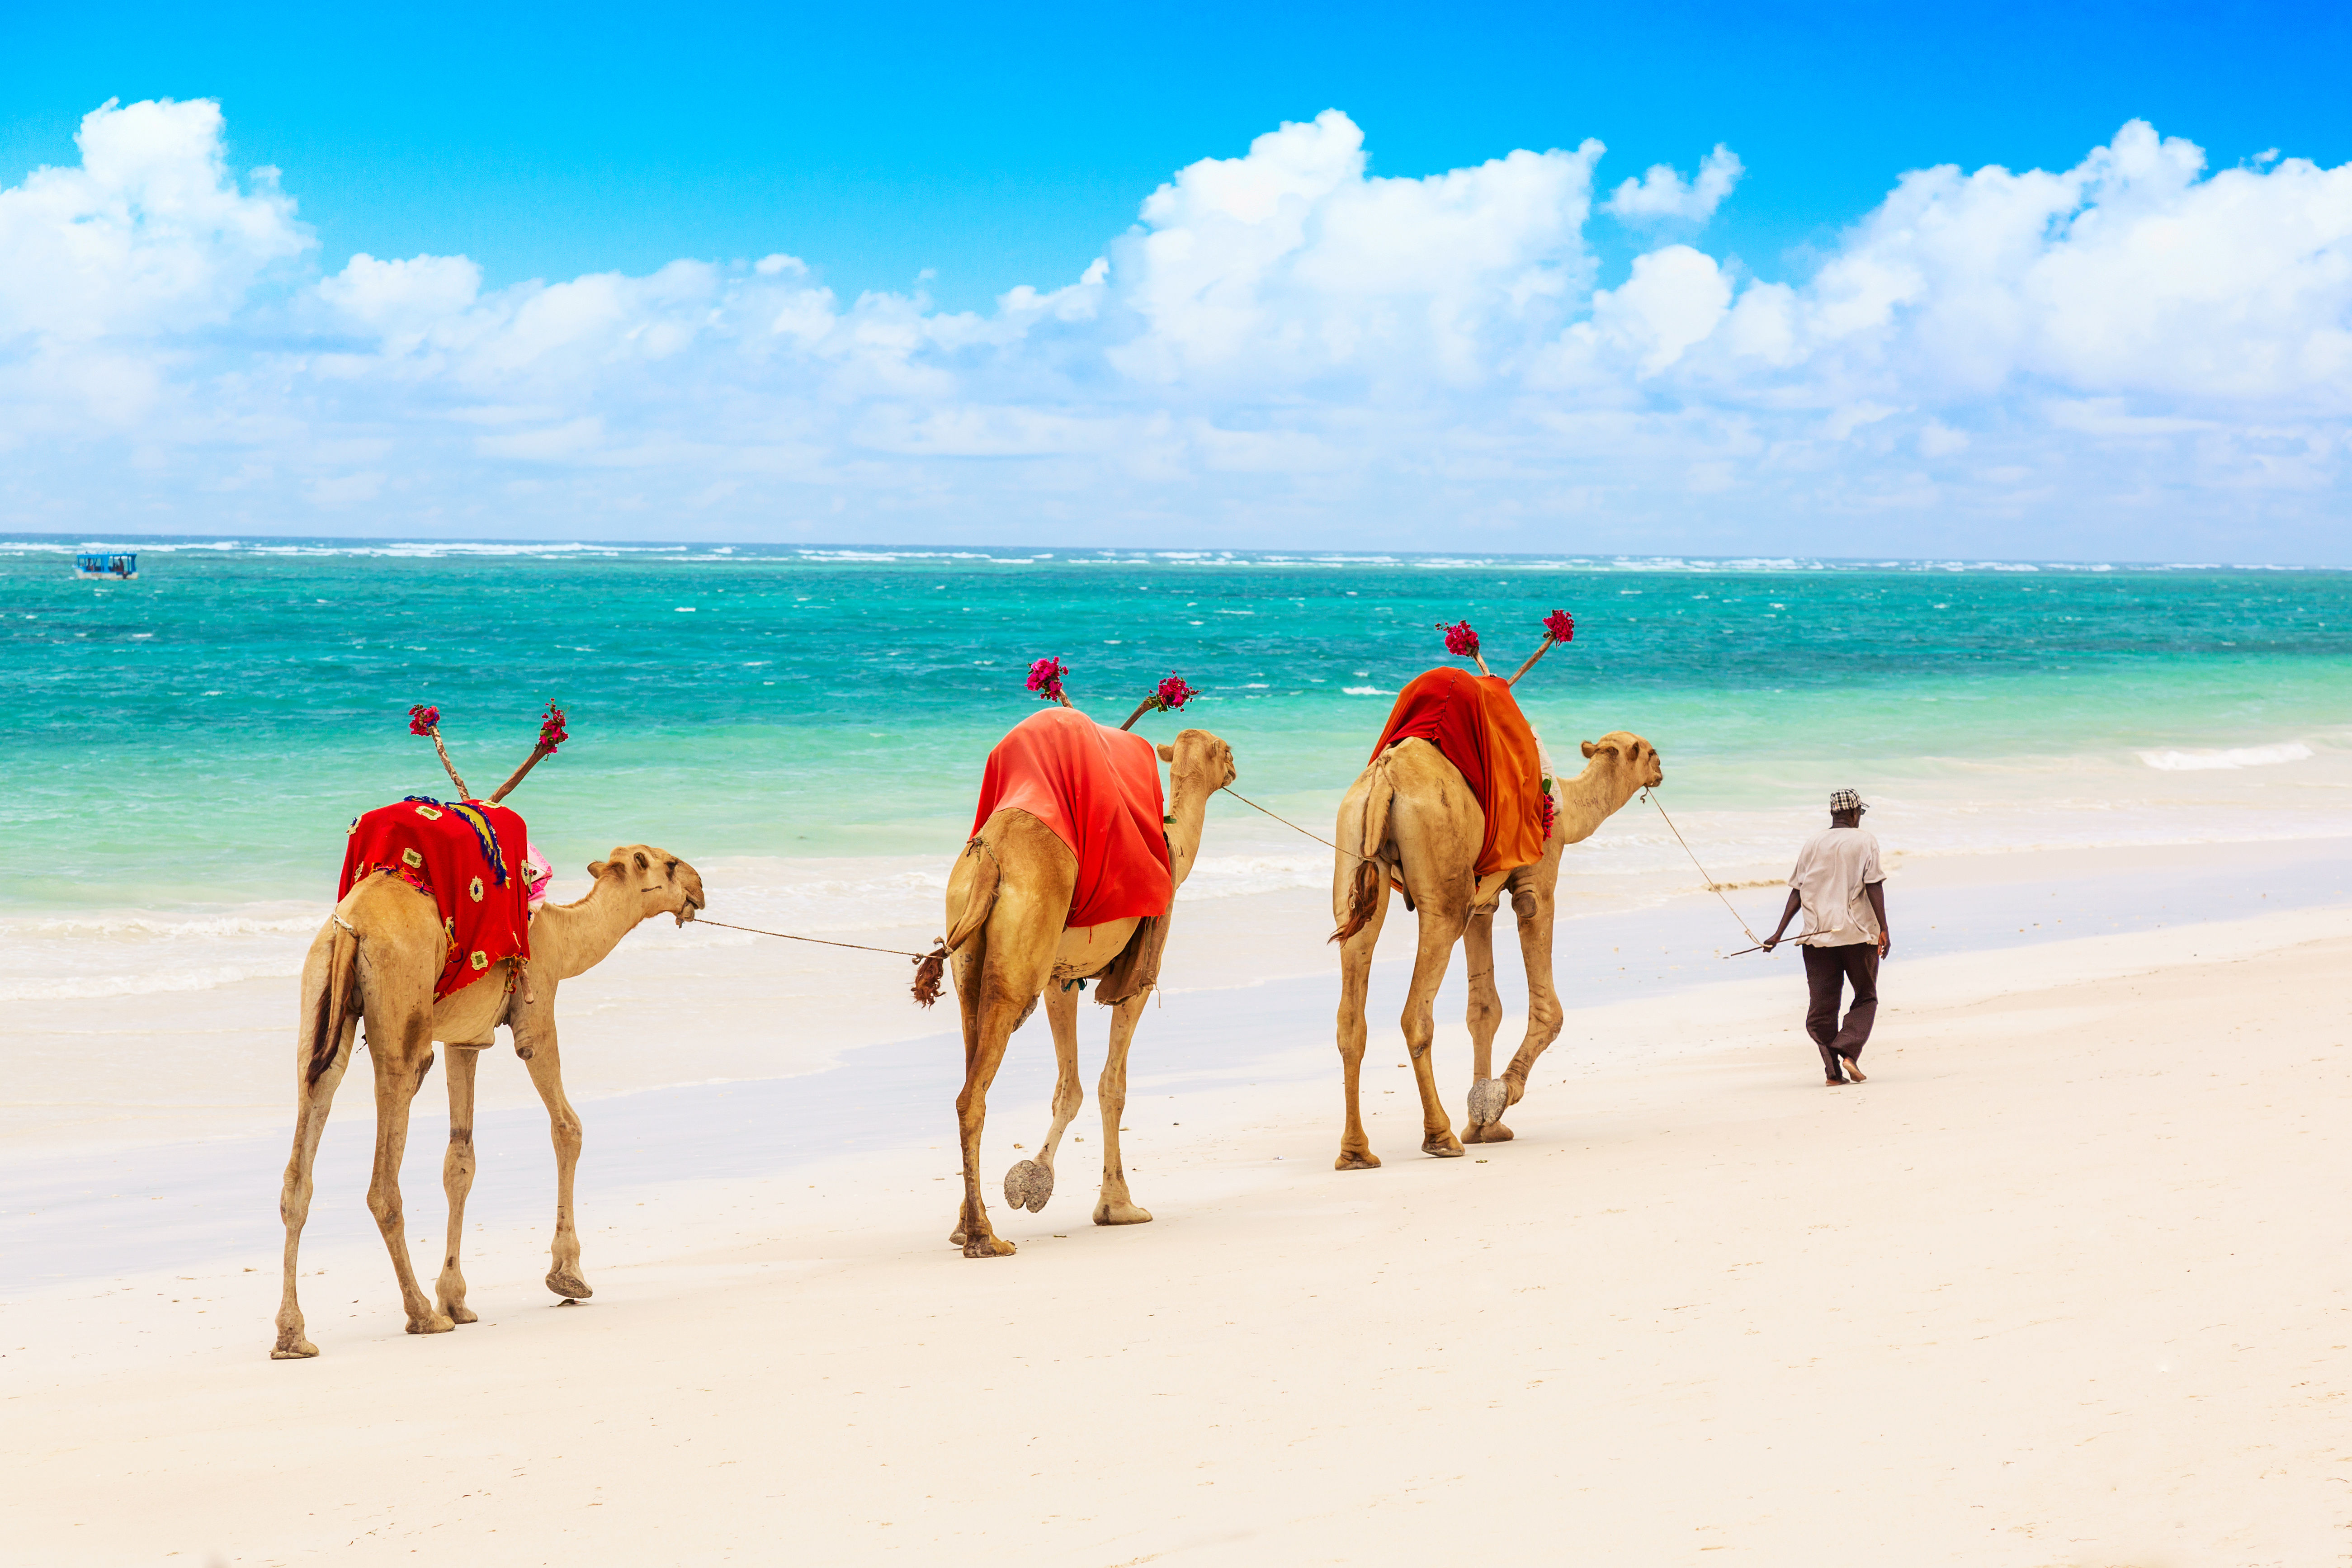 Camels on African Indian Ocean white sand beach with clear blue waters.